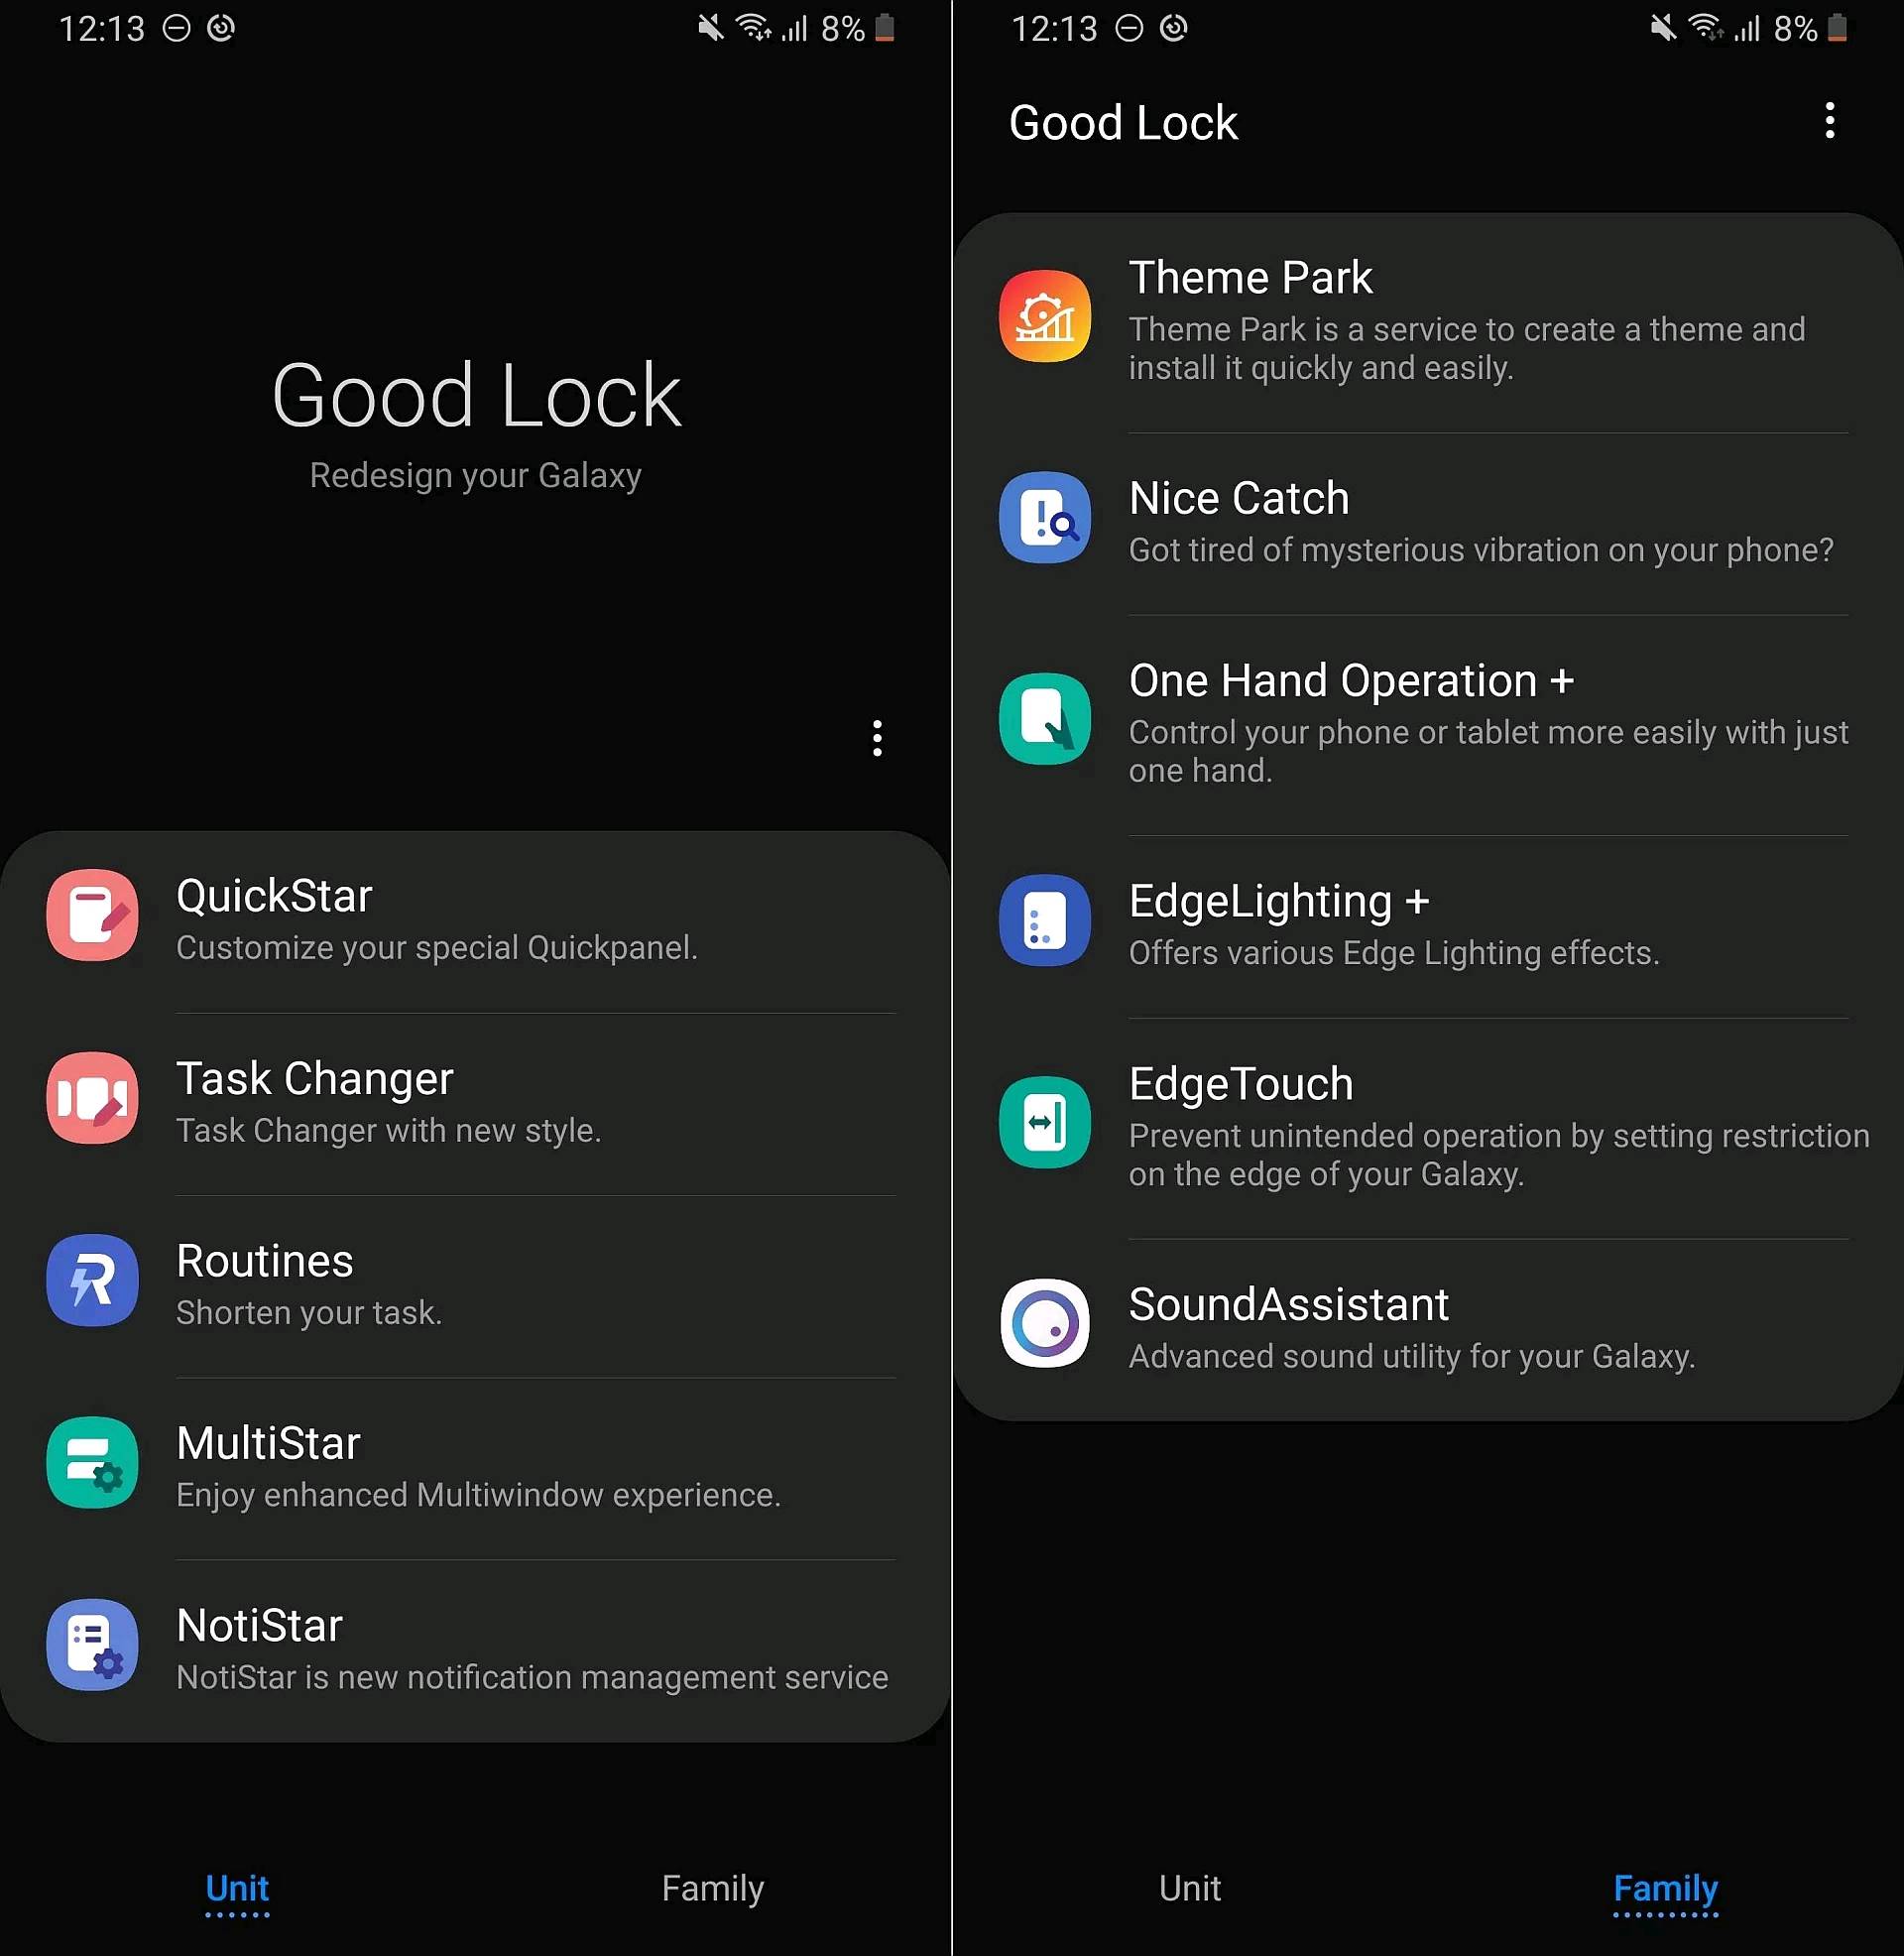 Download Good Lock 2020 APK for Samsung's Android ... - Samsung Members